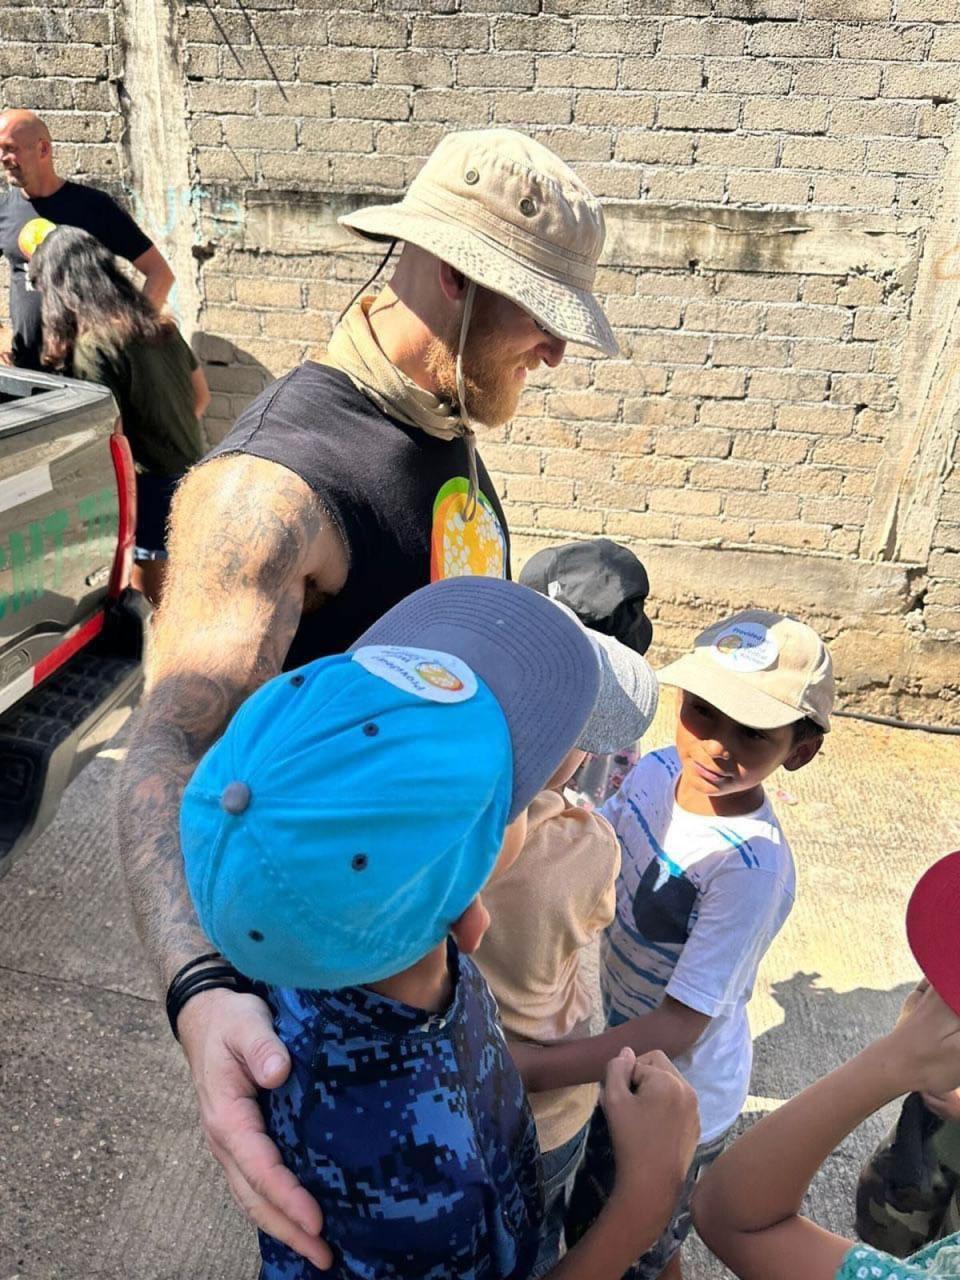 Jacob Flickinger hugging children in Acapulco while on a WCK mission (Jonathan Duguay)